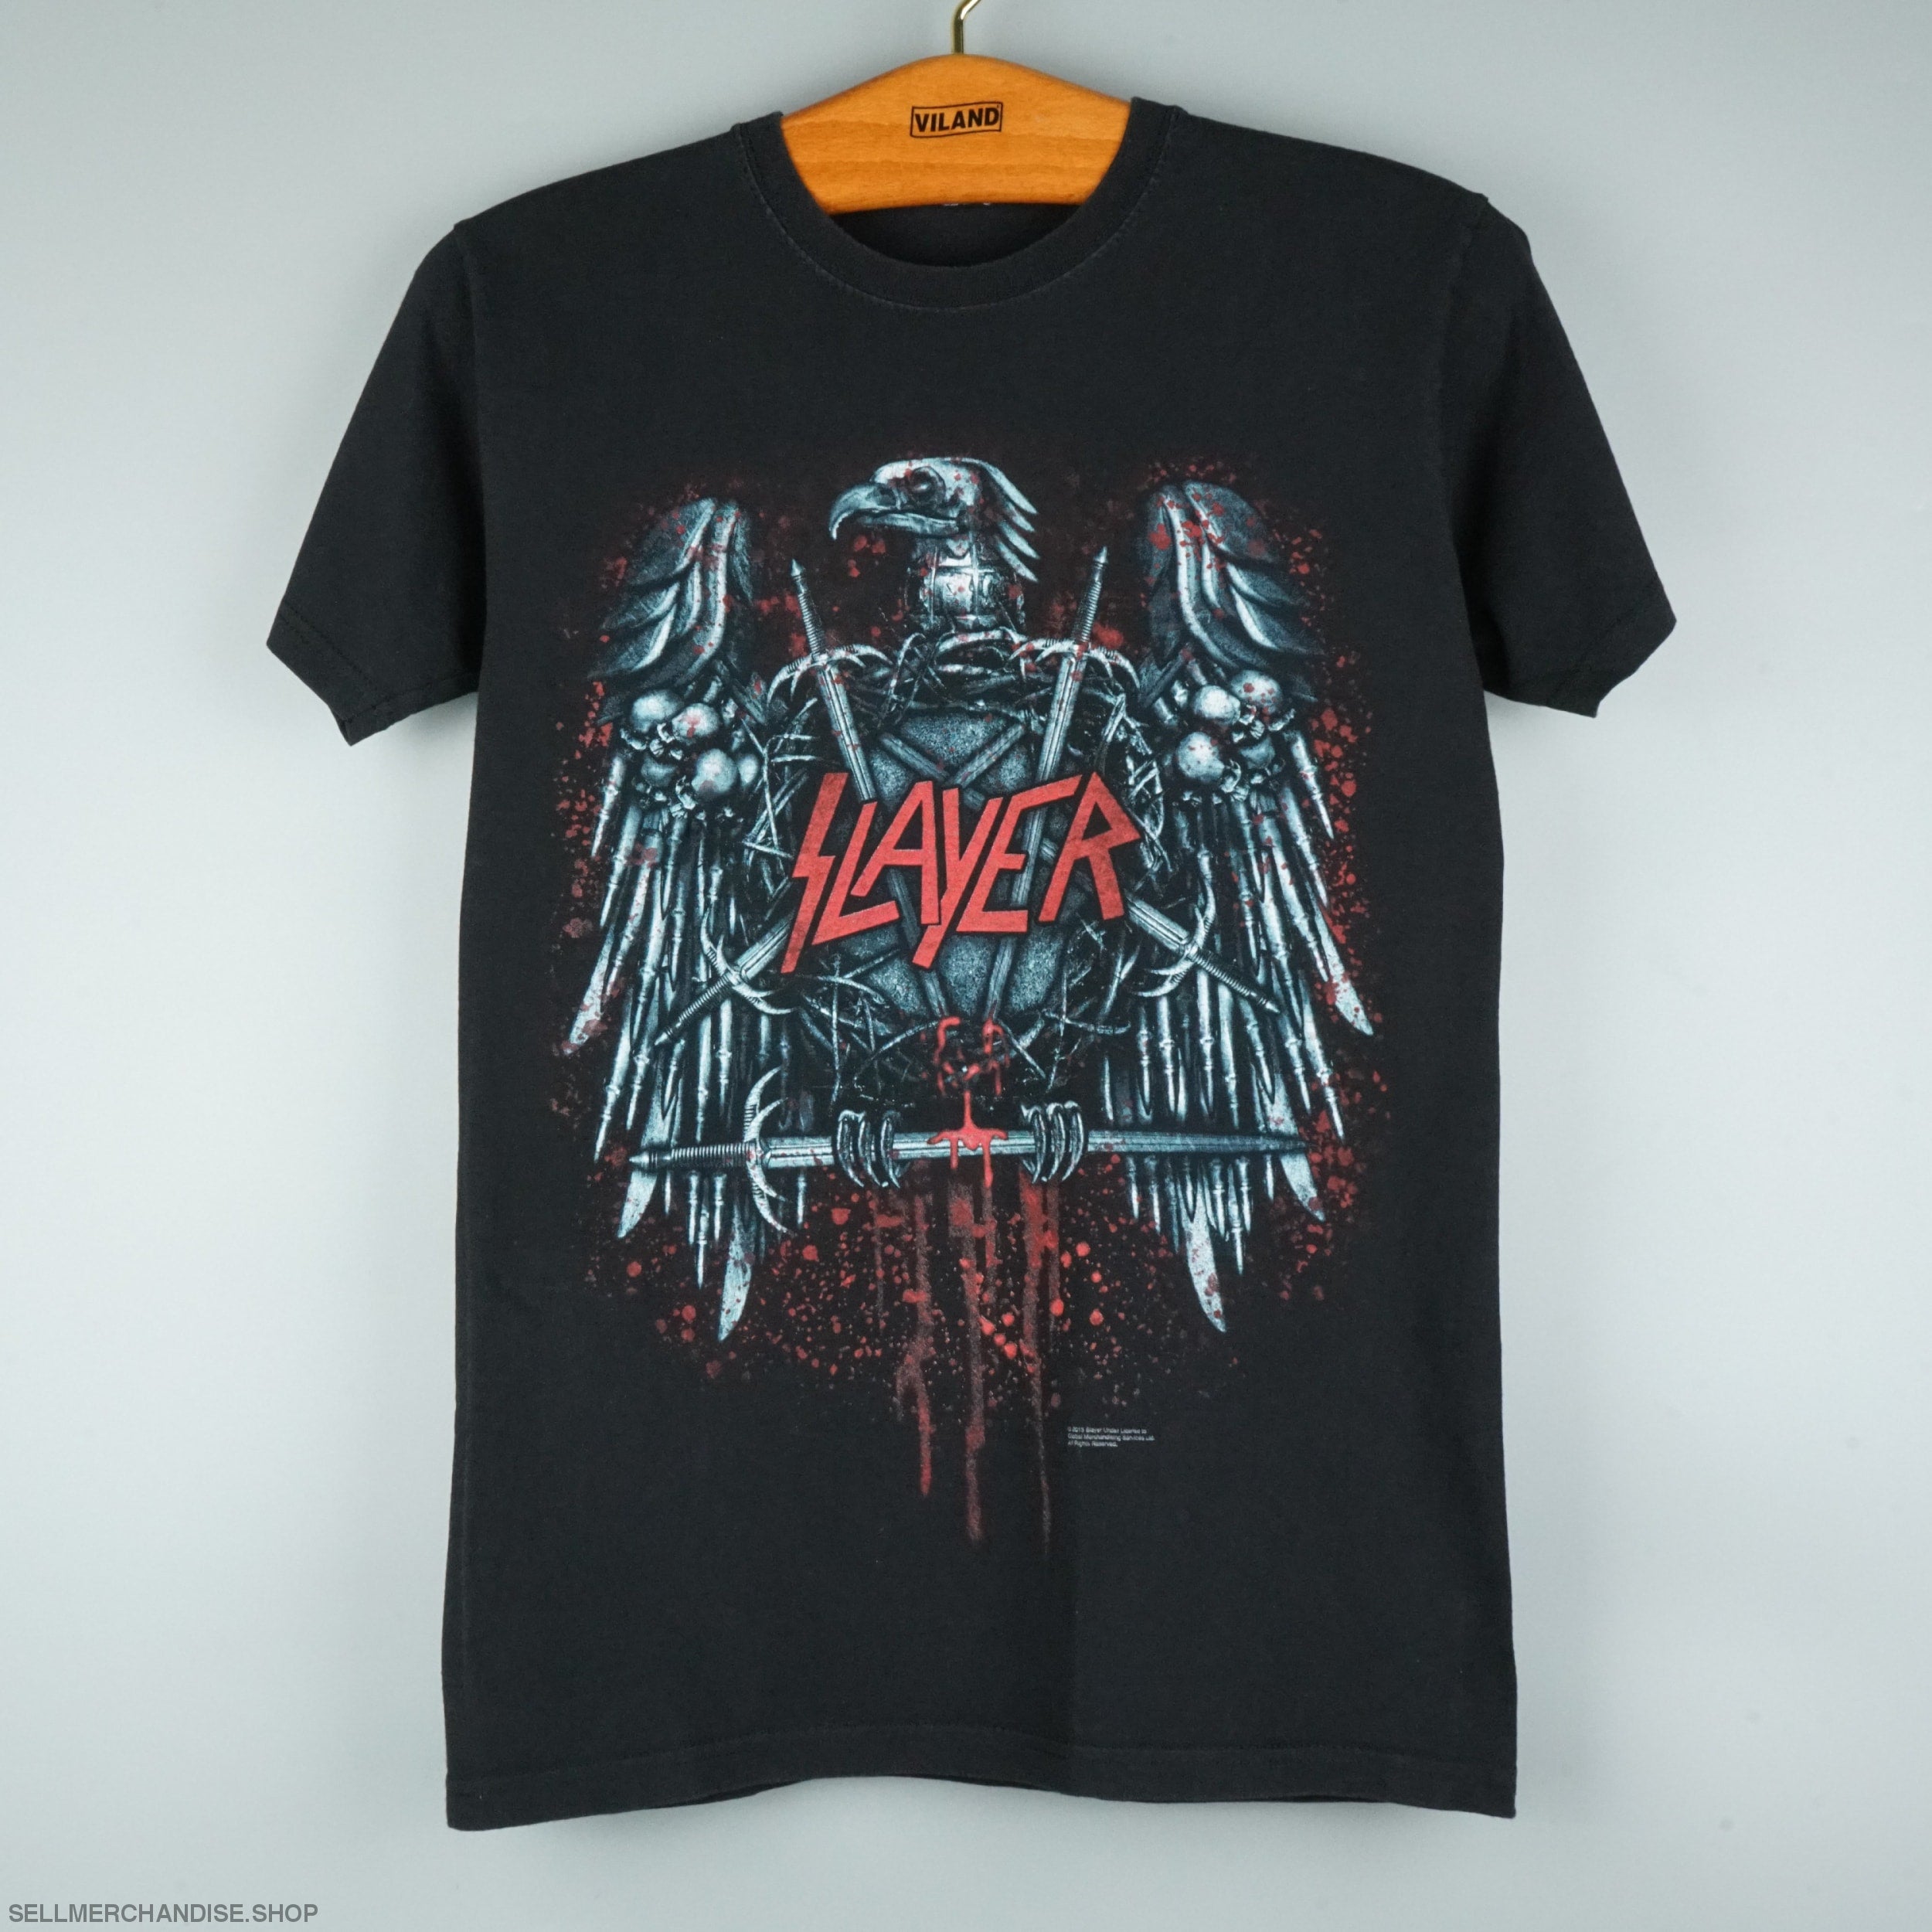 Vintage Slayer t shirt early 2000s Hell Awaits | SellMerchandise